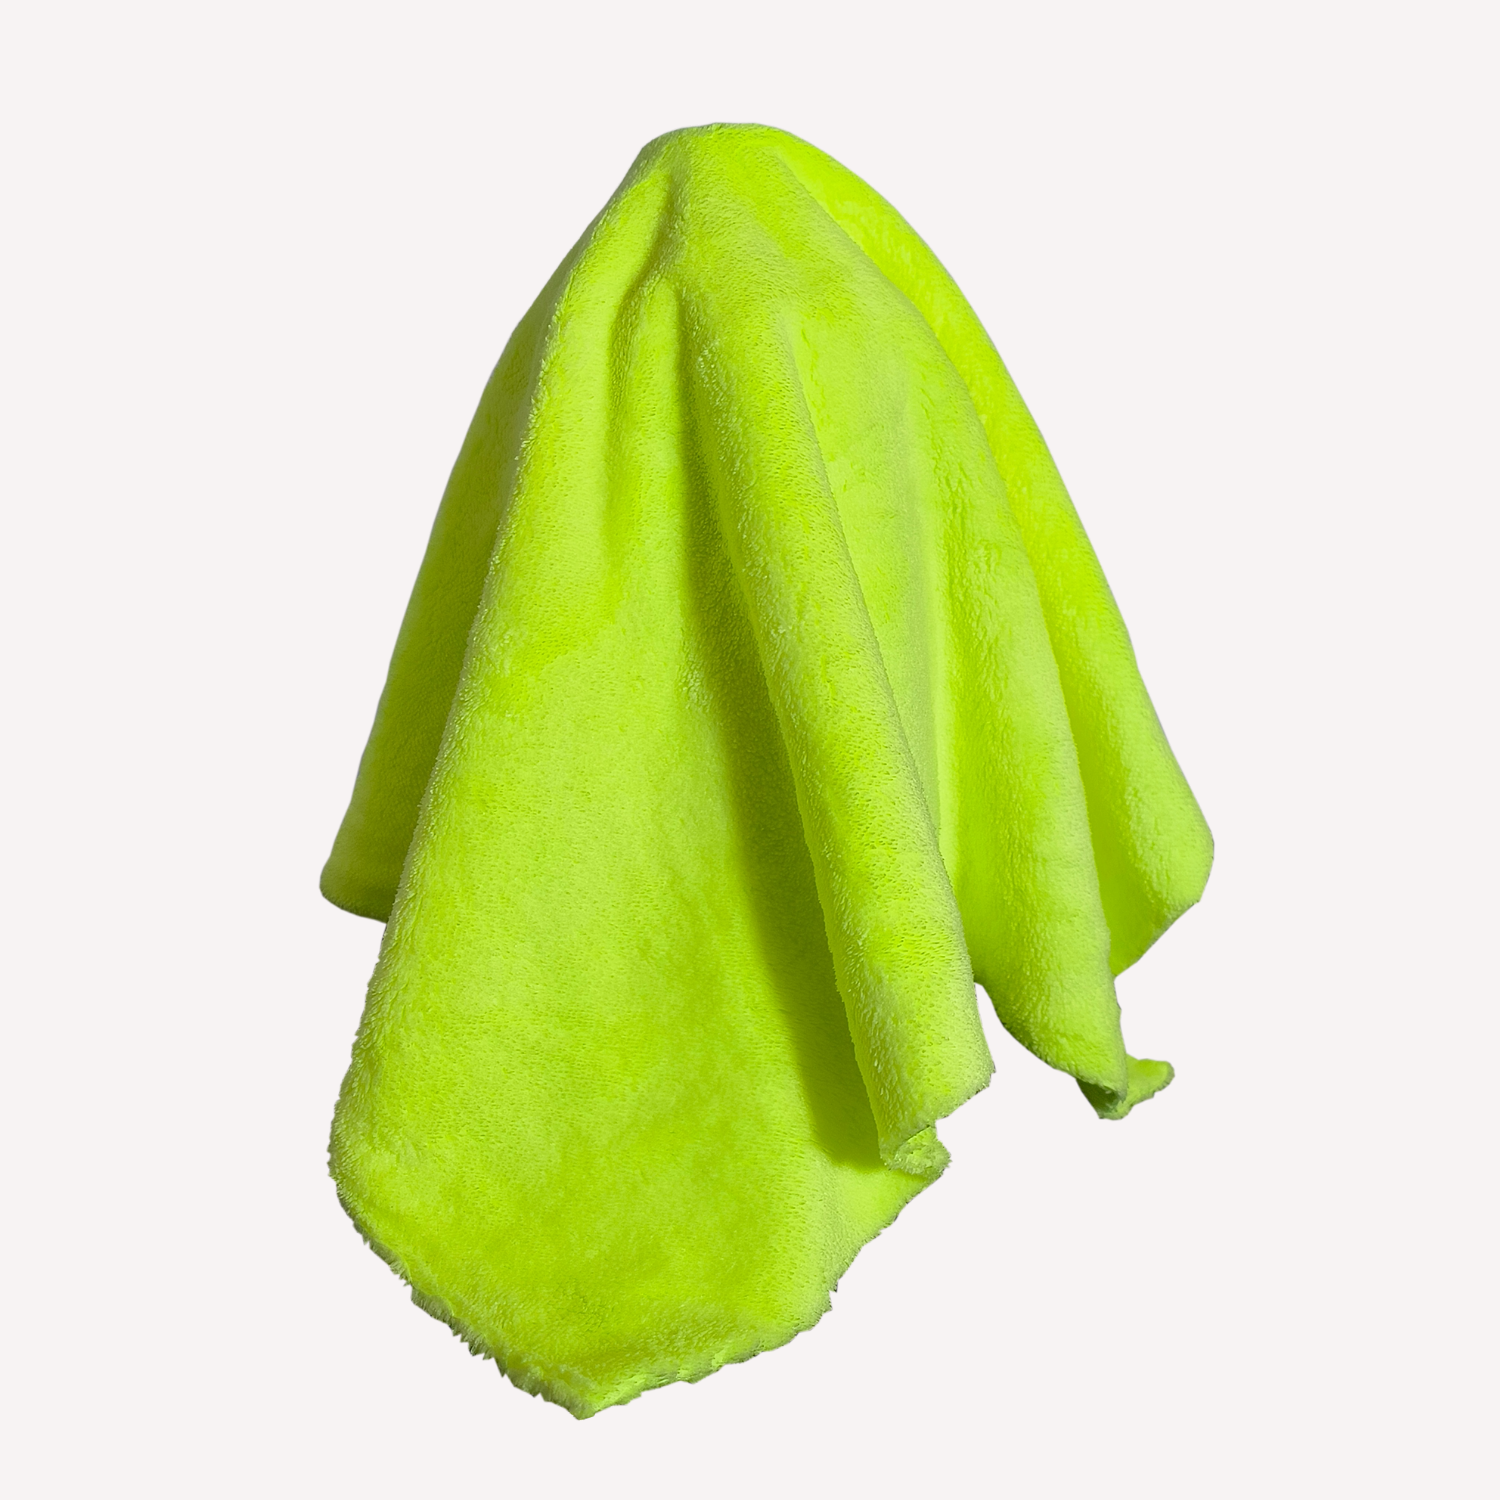 Image of green Super Soft Fleece designed for polishing and buffing motorcycles and cars.